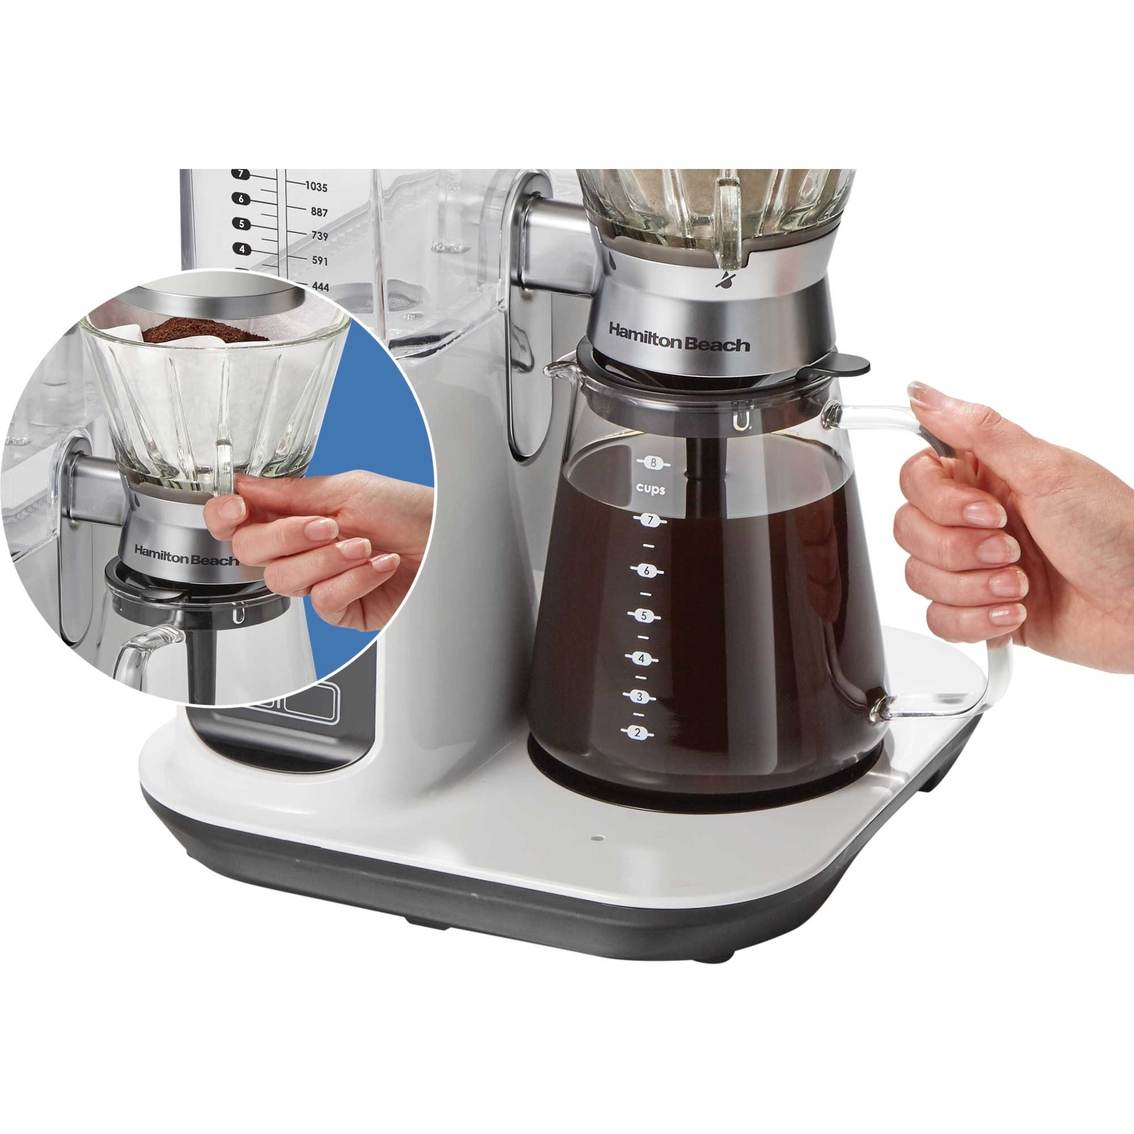 Hamilton Beach Convenient Craft Automatic or Manual Pour Over Coffee Brewer - Image 5 of 7